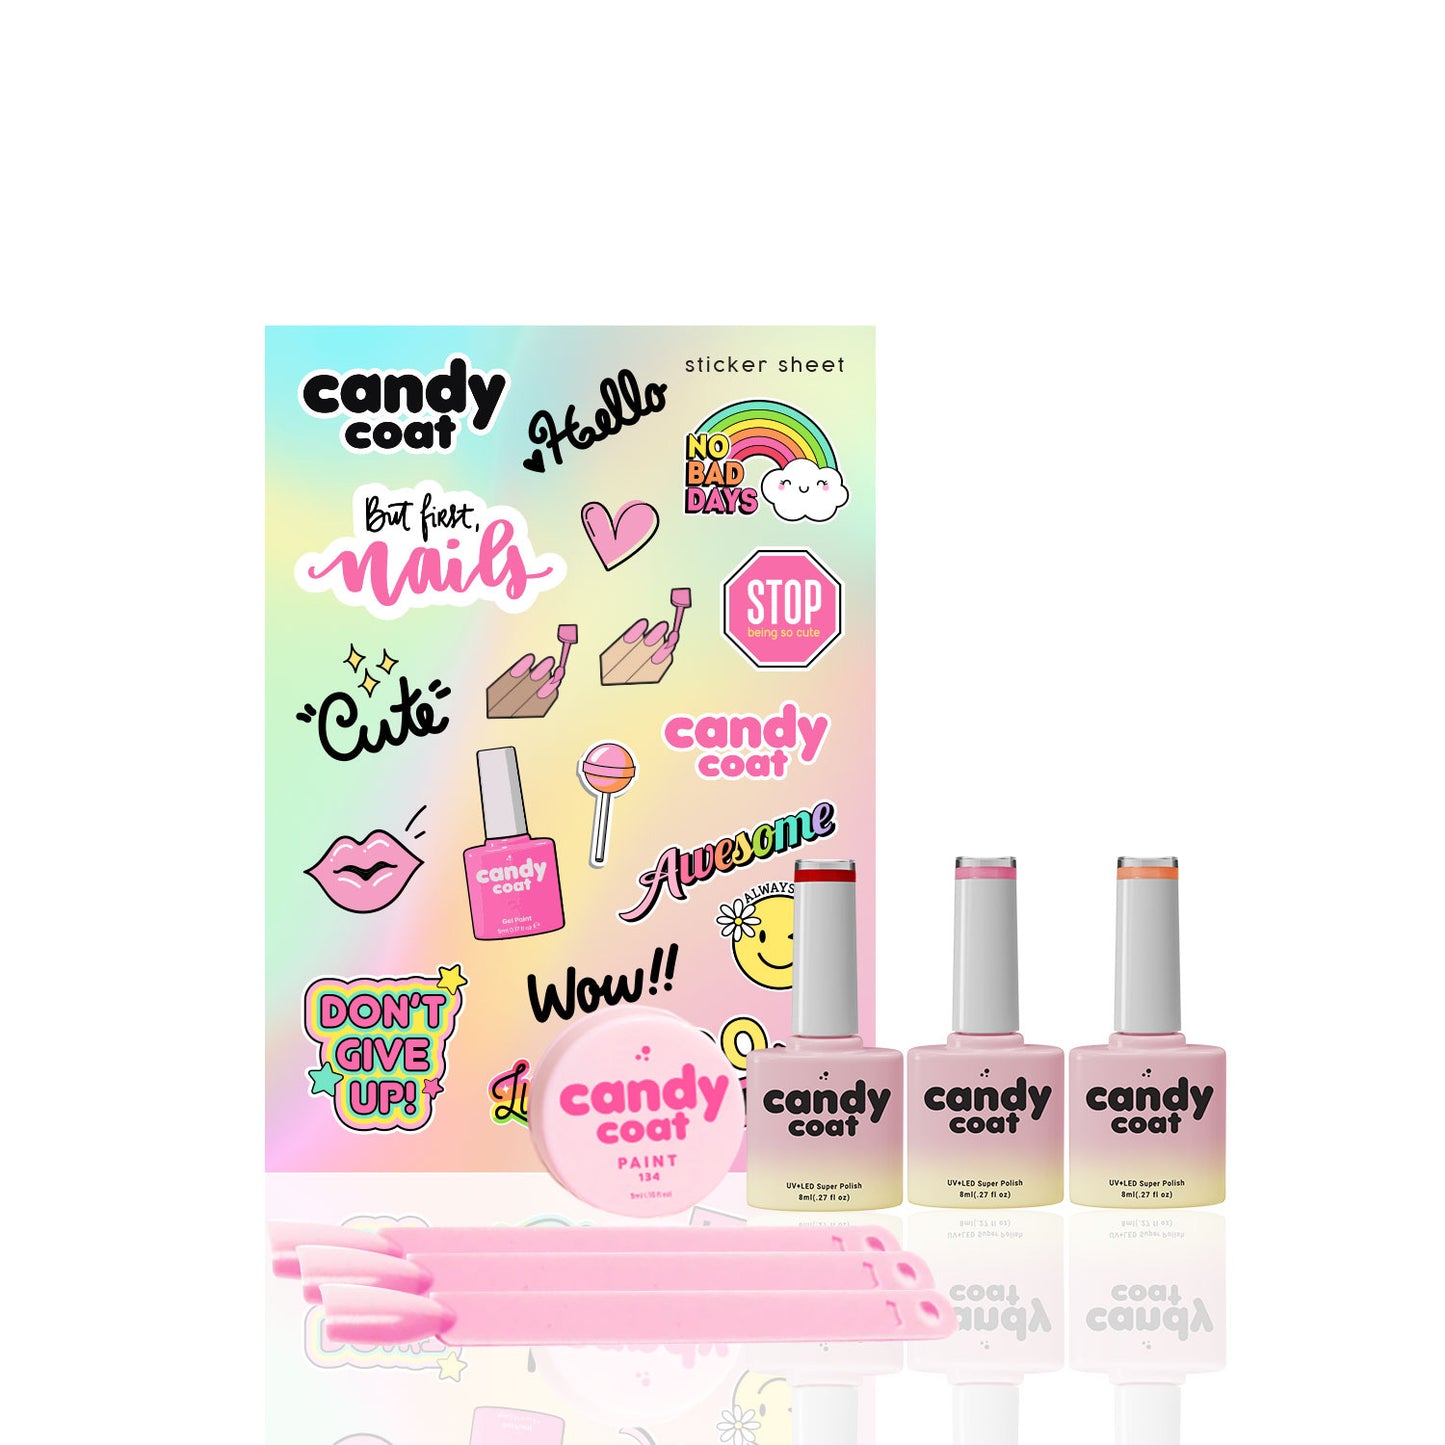 Candy Coat - Lucky Dip Candy Bag - Candy Coat